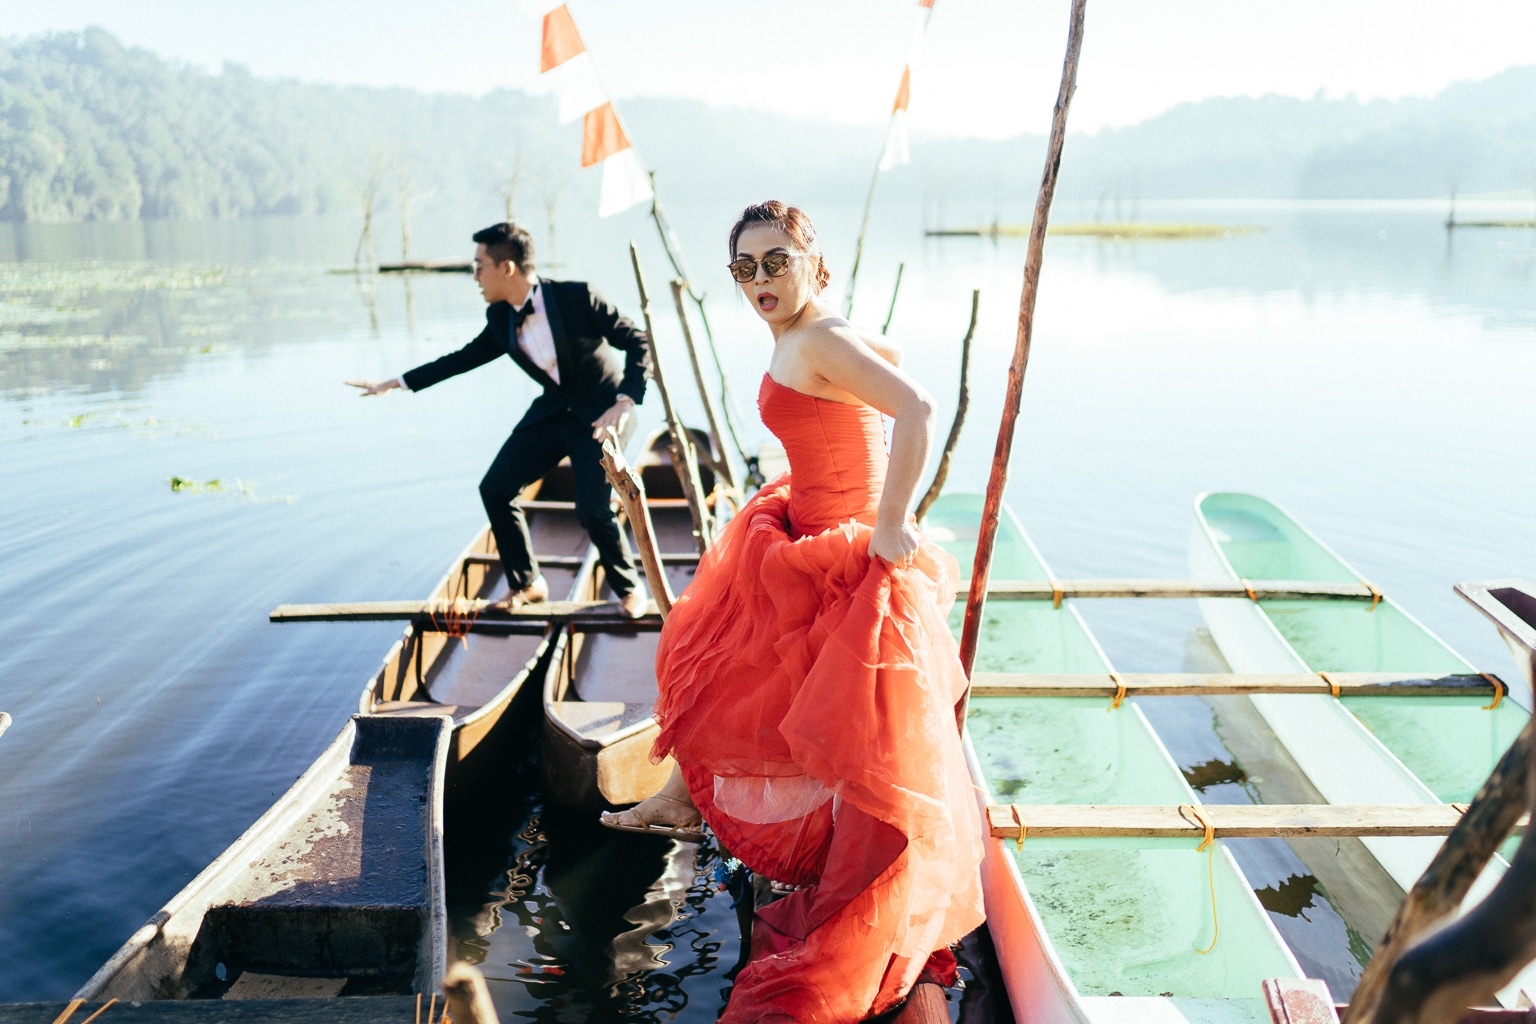 S&J: Bali Full Day Post-wedding Photography at Lake, Waterfall, Forest And Beach by Aswin on OneThreeOneFour 10